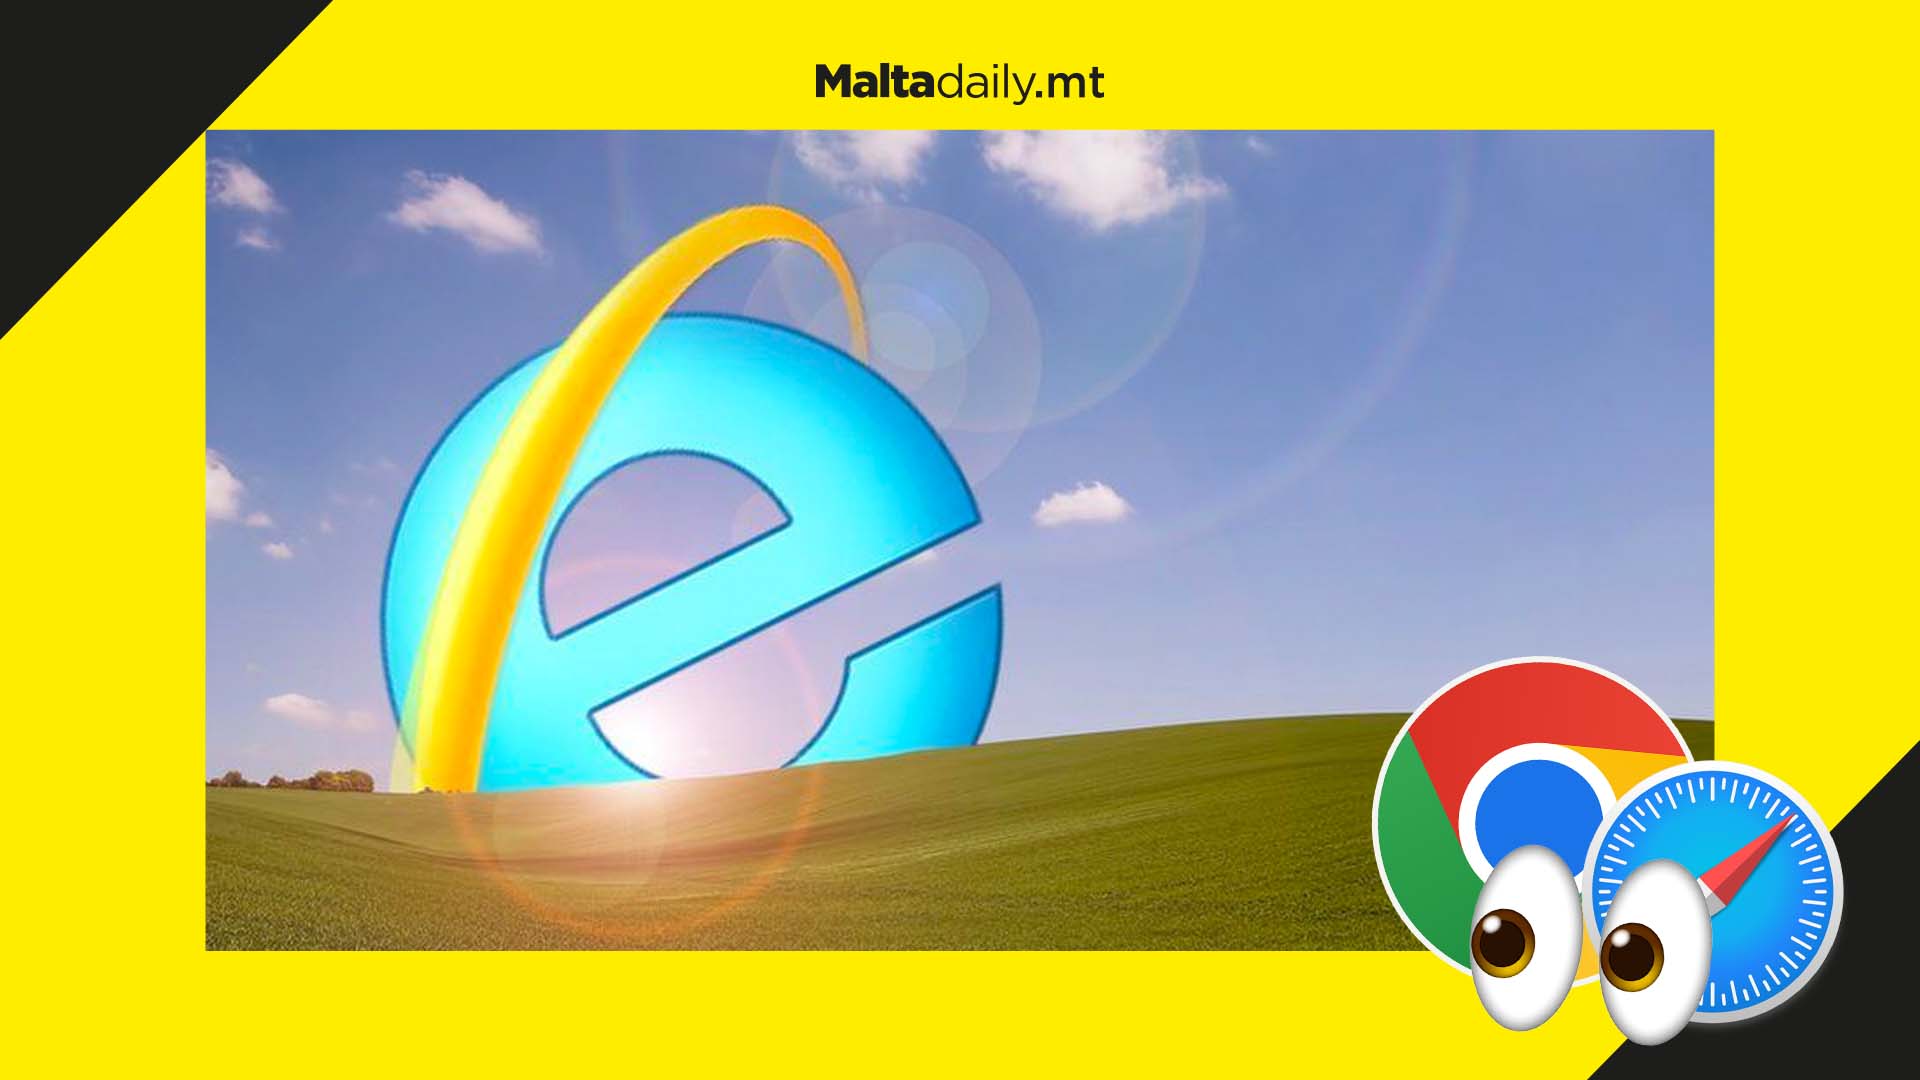 Internet Explorer to be officially shut down by Microsoft